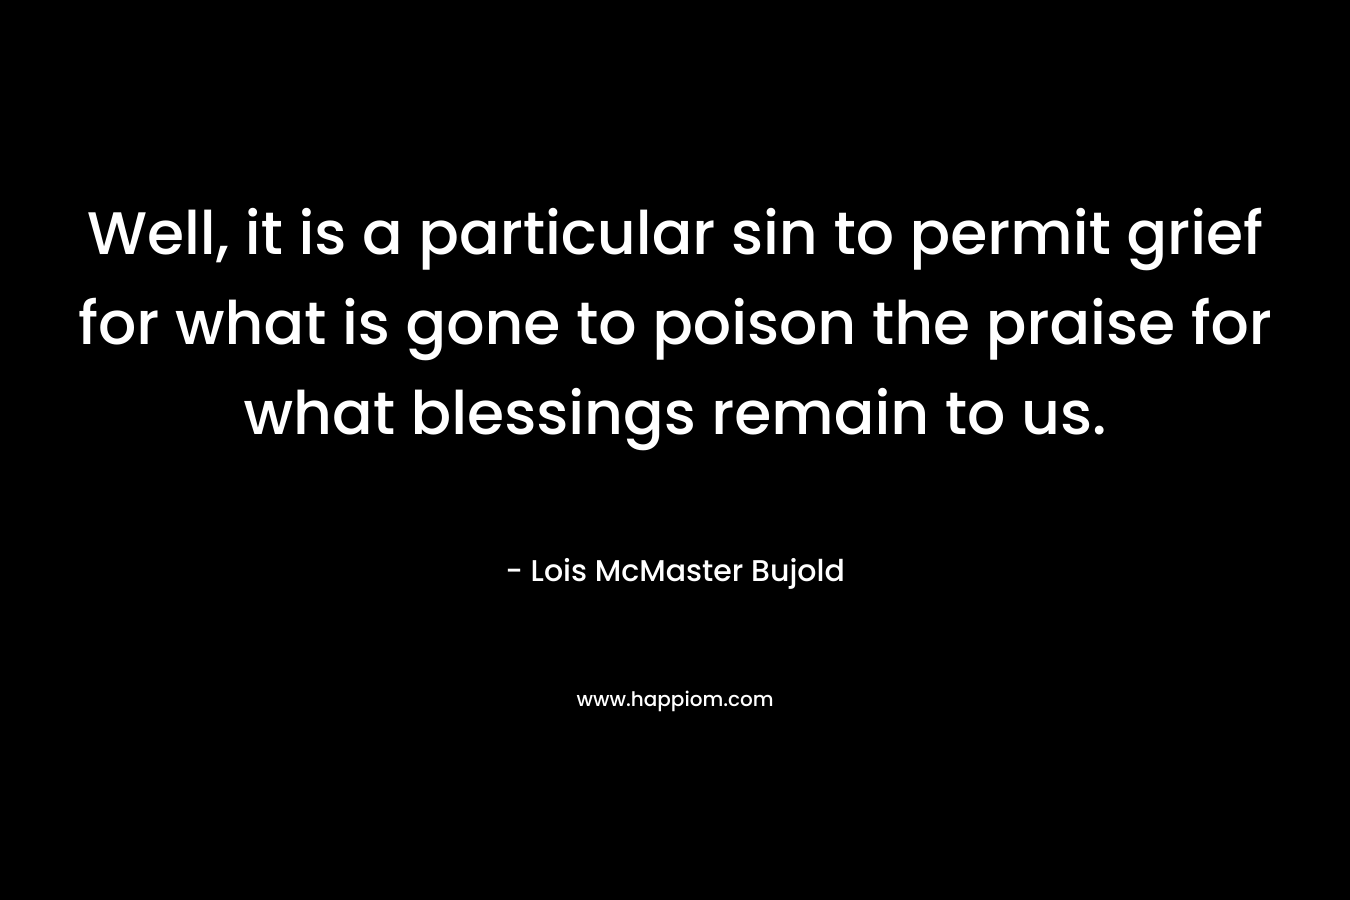 Well, it is a particular sin to permit grief for what is gone to poison the praise for what blessings remain to us.